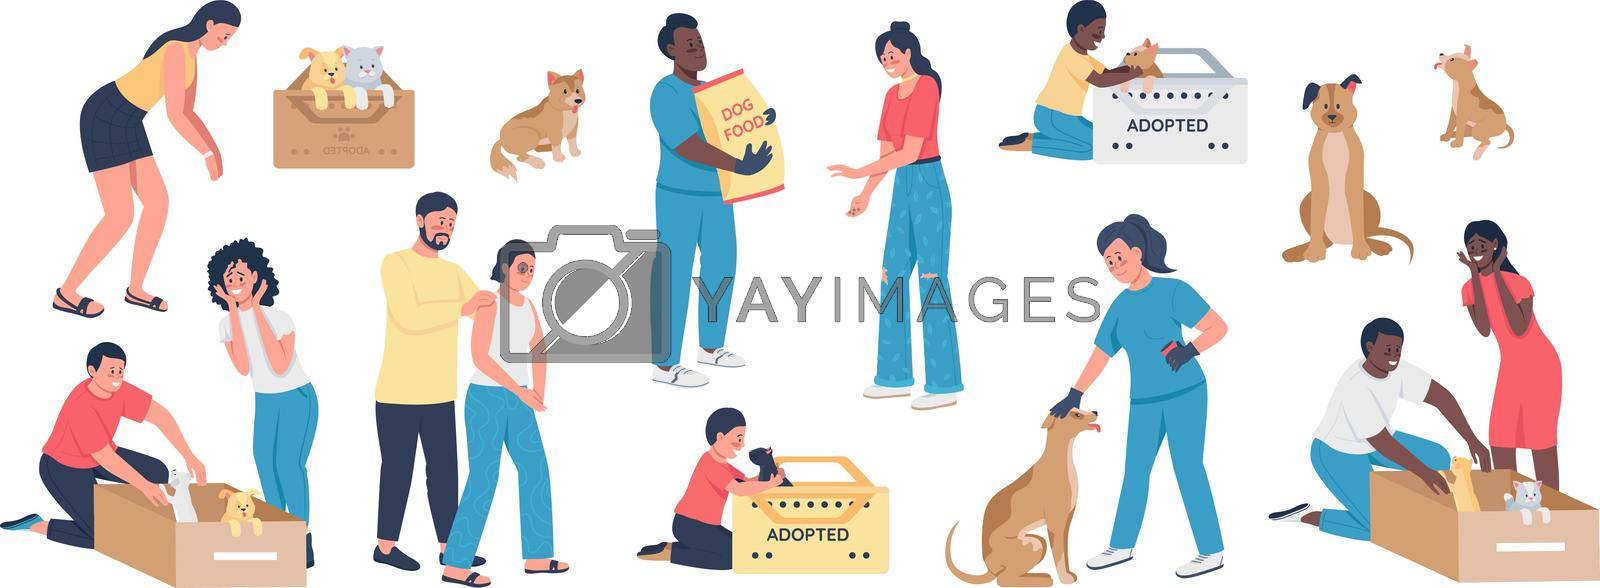 Adopting pets semi flat color vector character set. Posing figures. Full body people on white. Rescue animals isolated modern cartoon style illustration for graphic design and animation collection